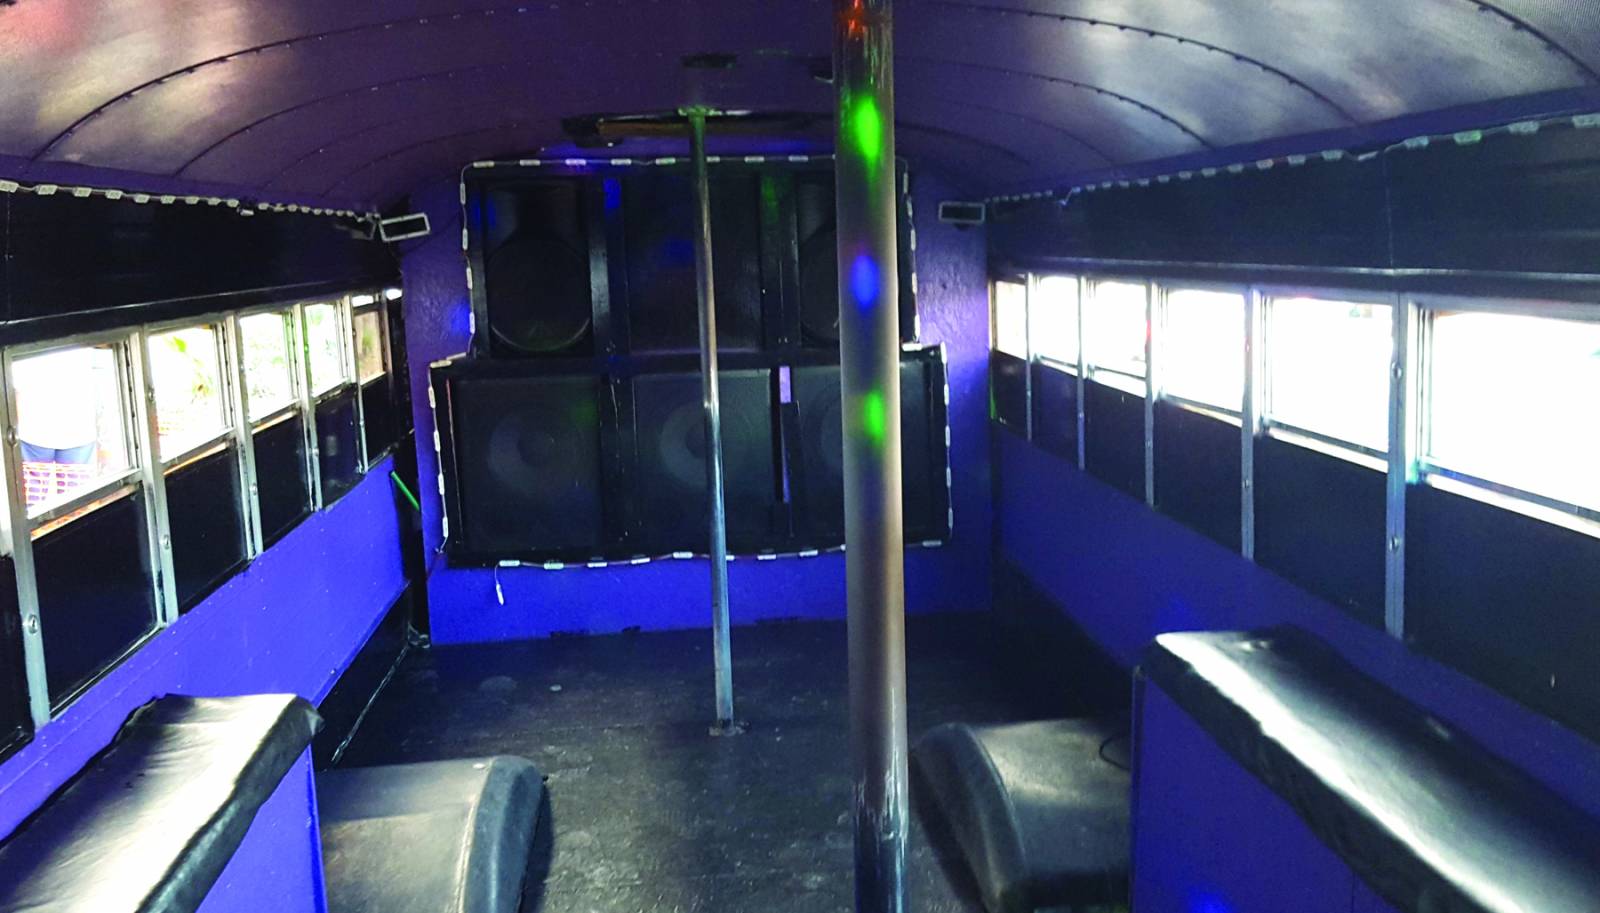 The purple-painted party bus included what was described as brass stripper’s poles as part of its interior motif.